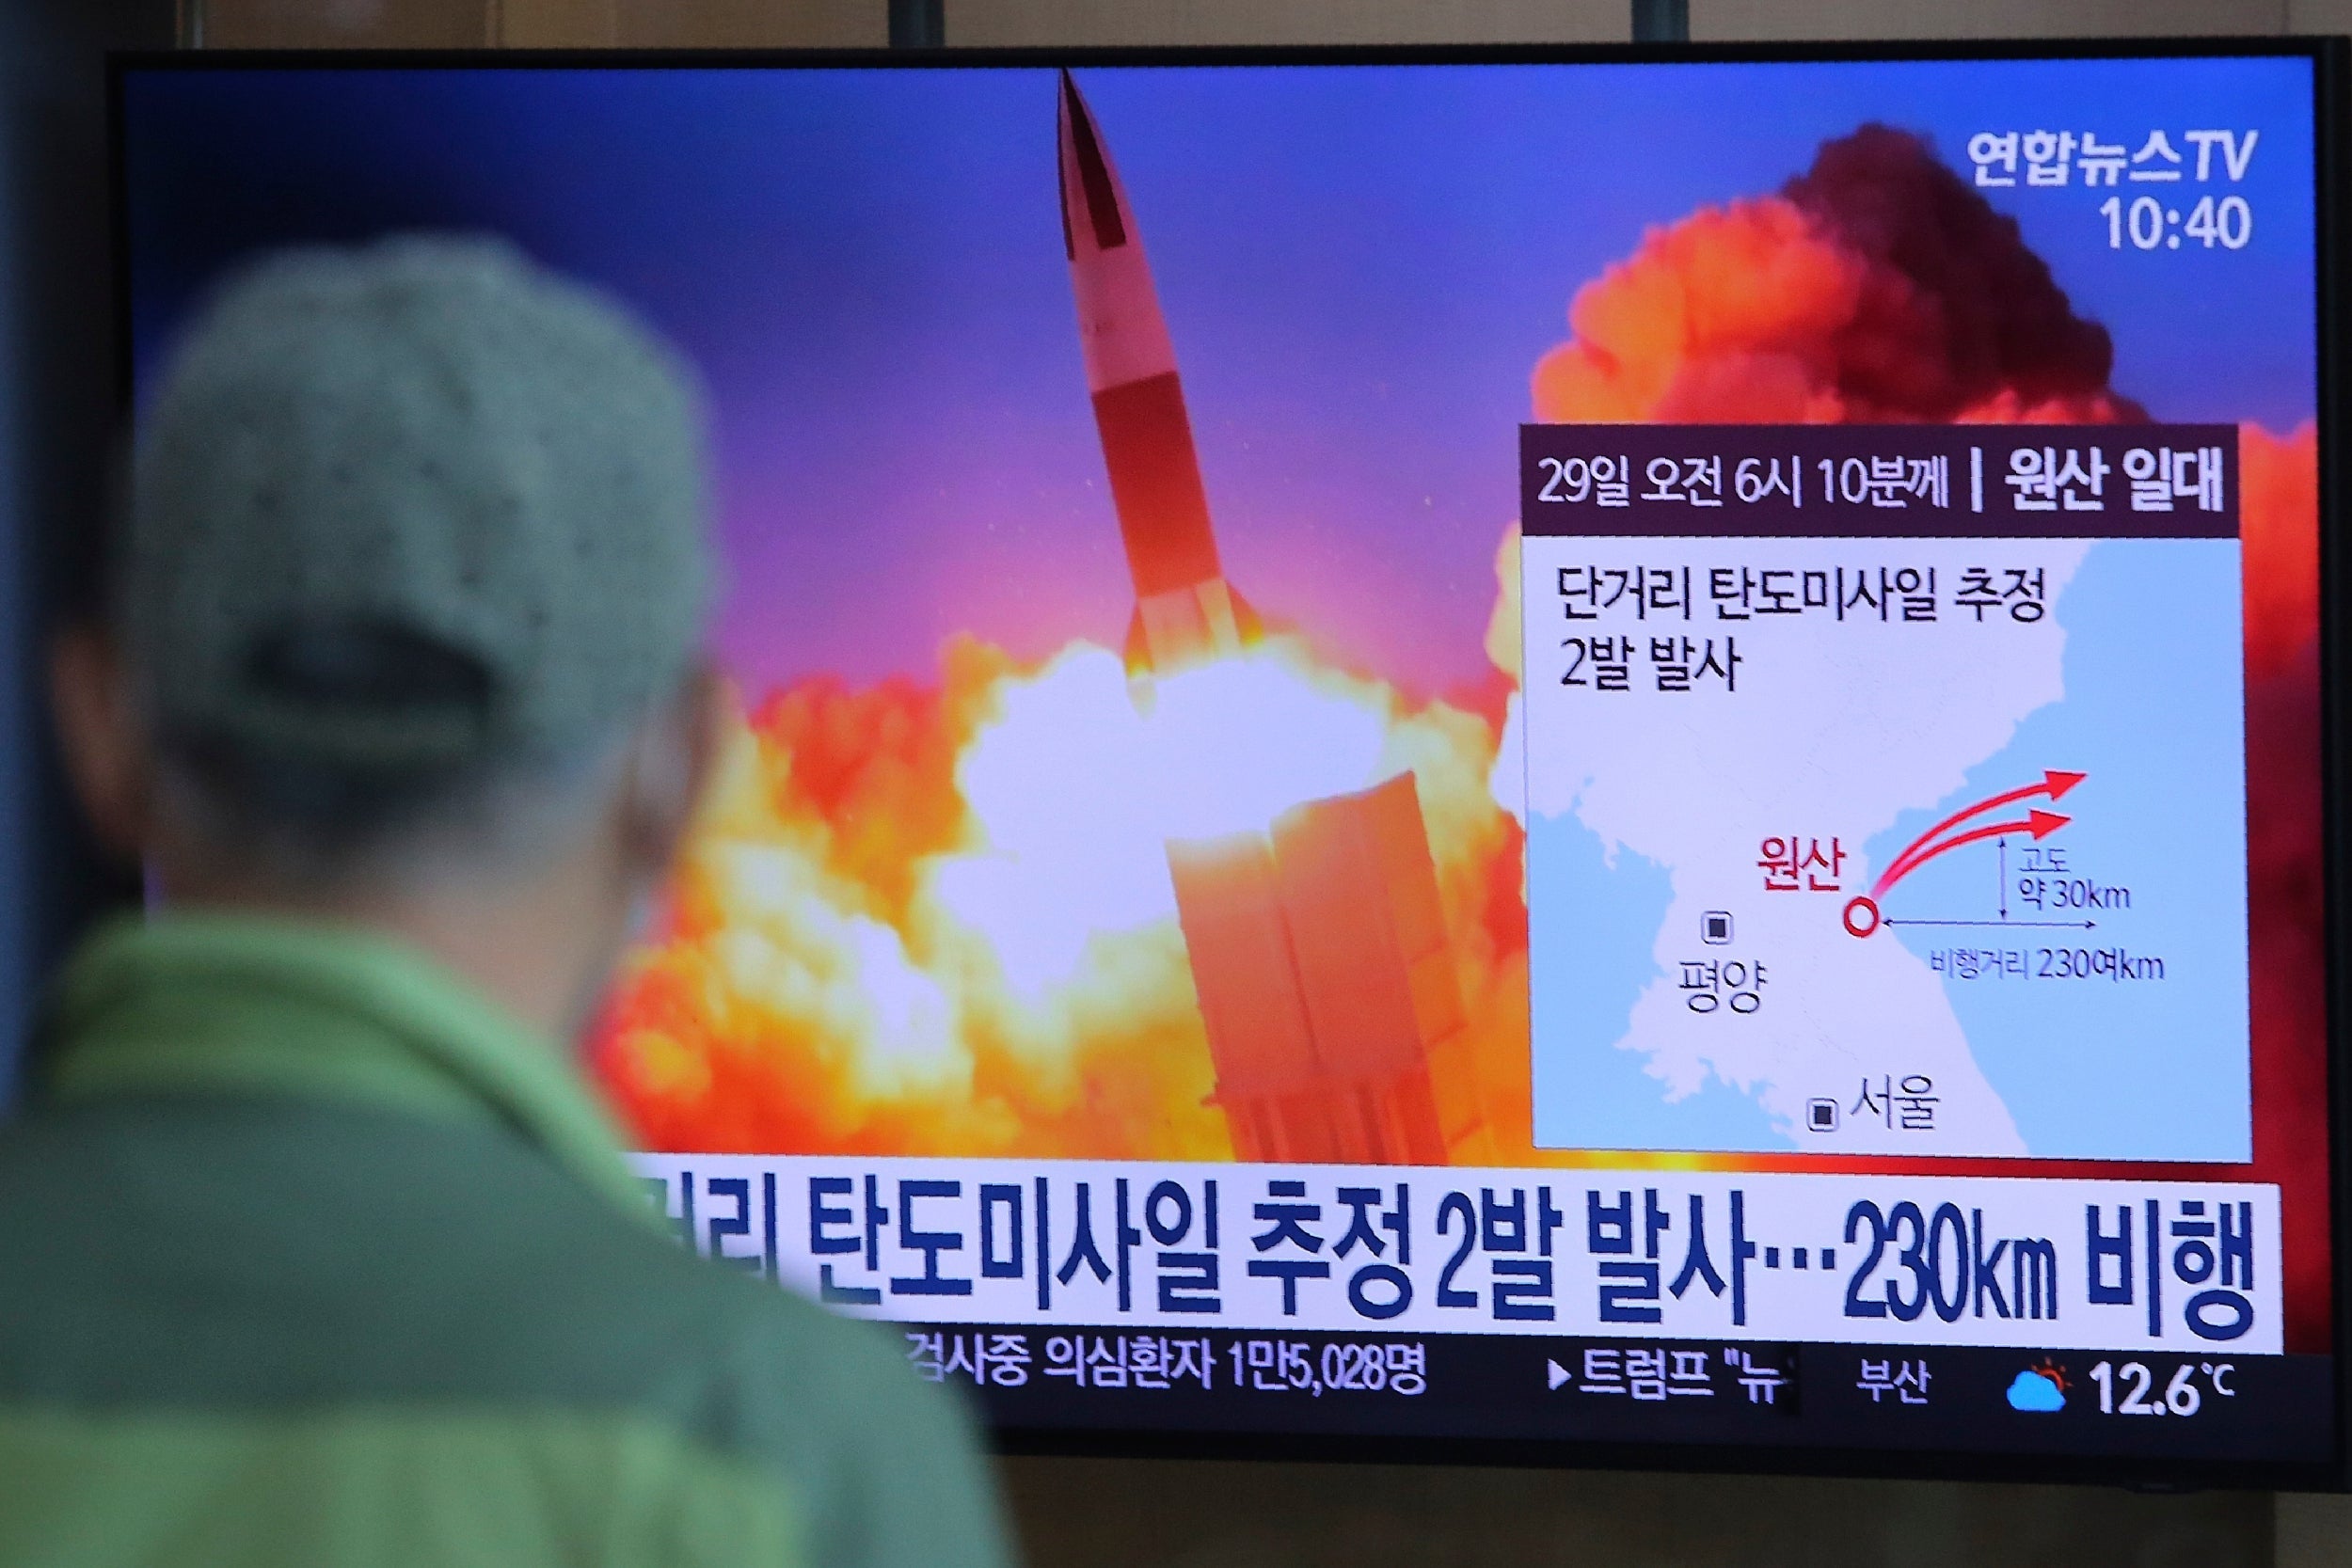 'Very inappropriate': South Korea responds after Pyongyang launches ballistic missiles